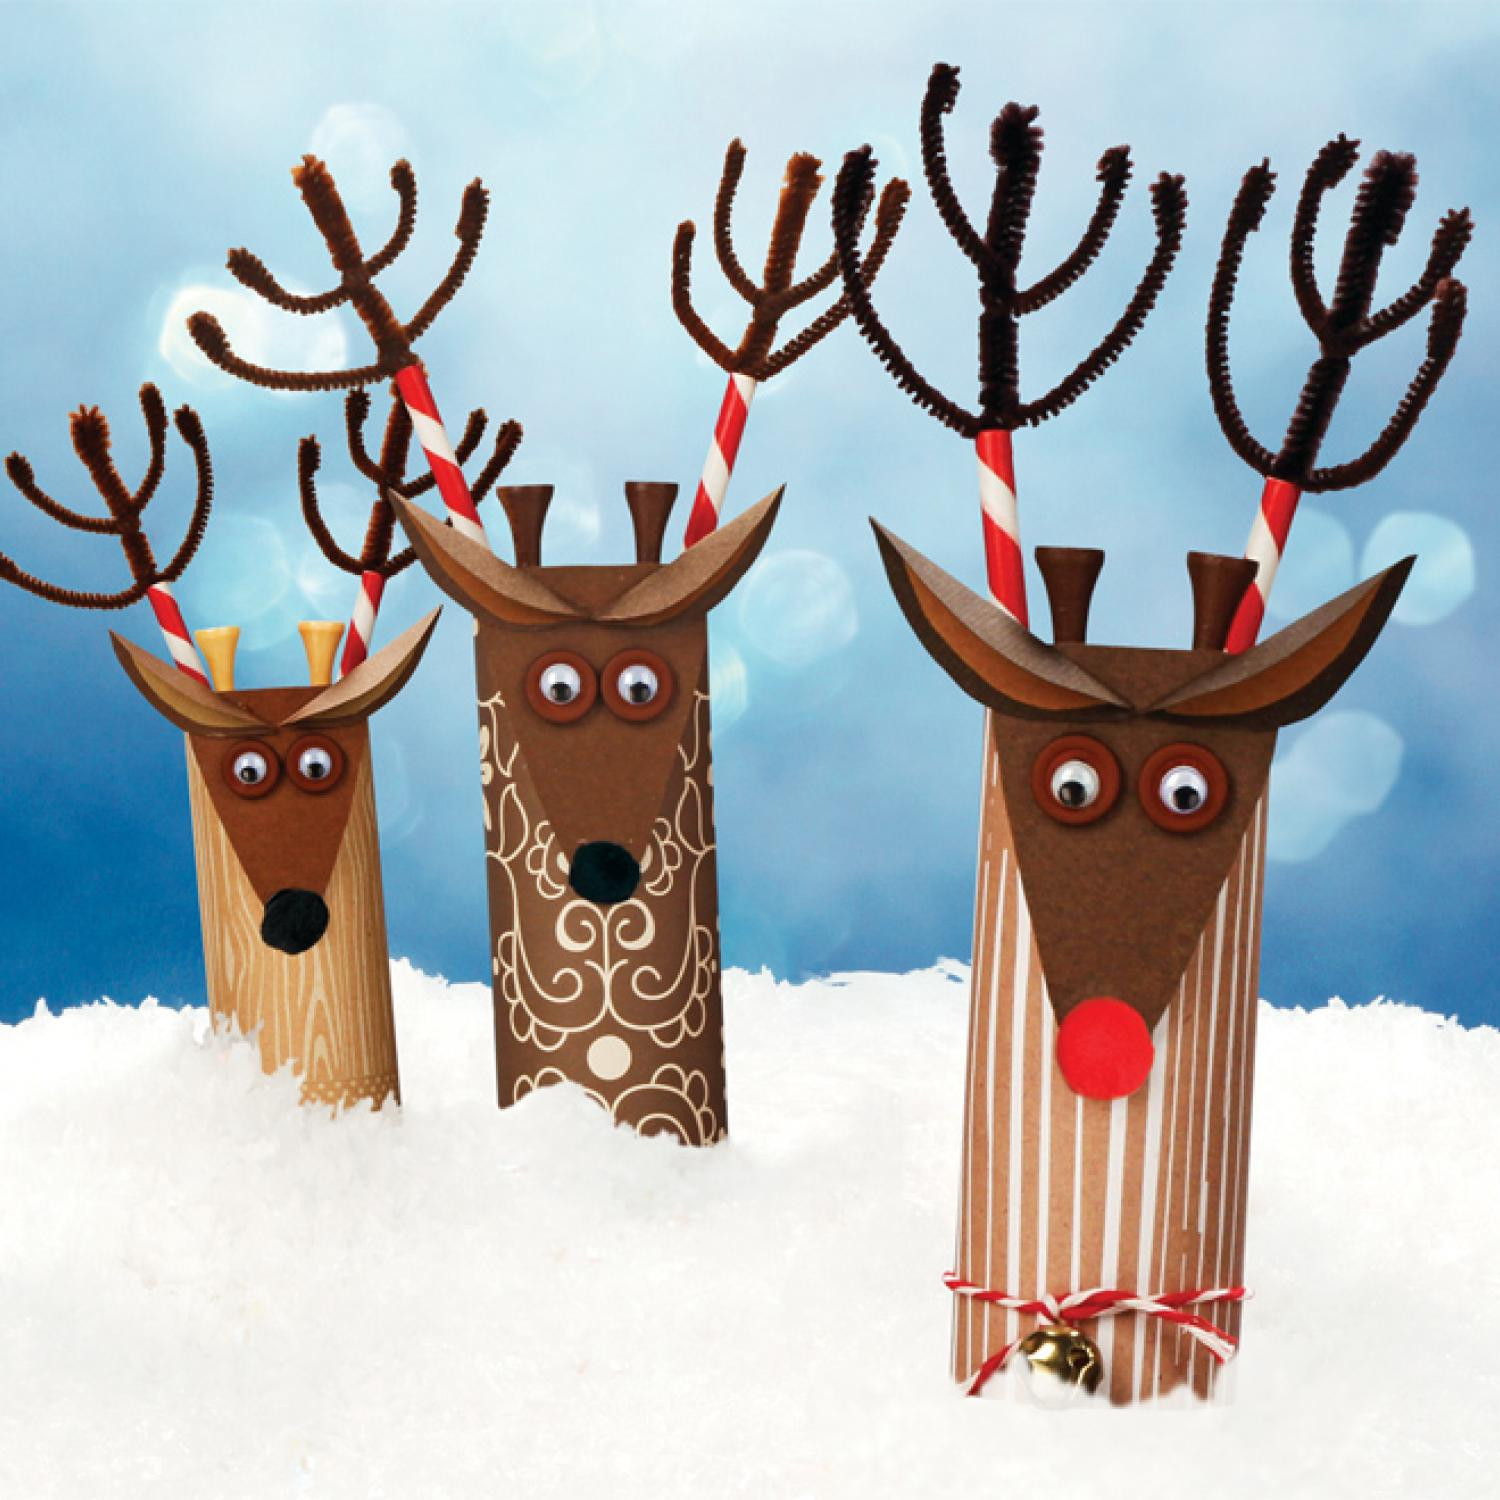 Christmas Art Ideas
 Easy Christmas Crafts and Activities for Kids